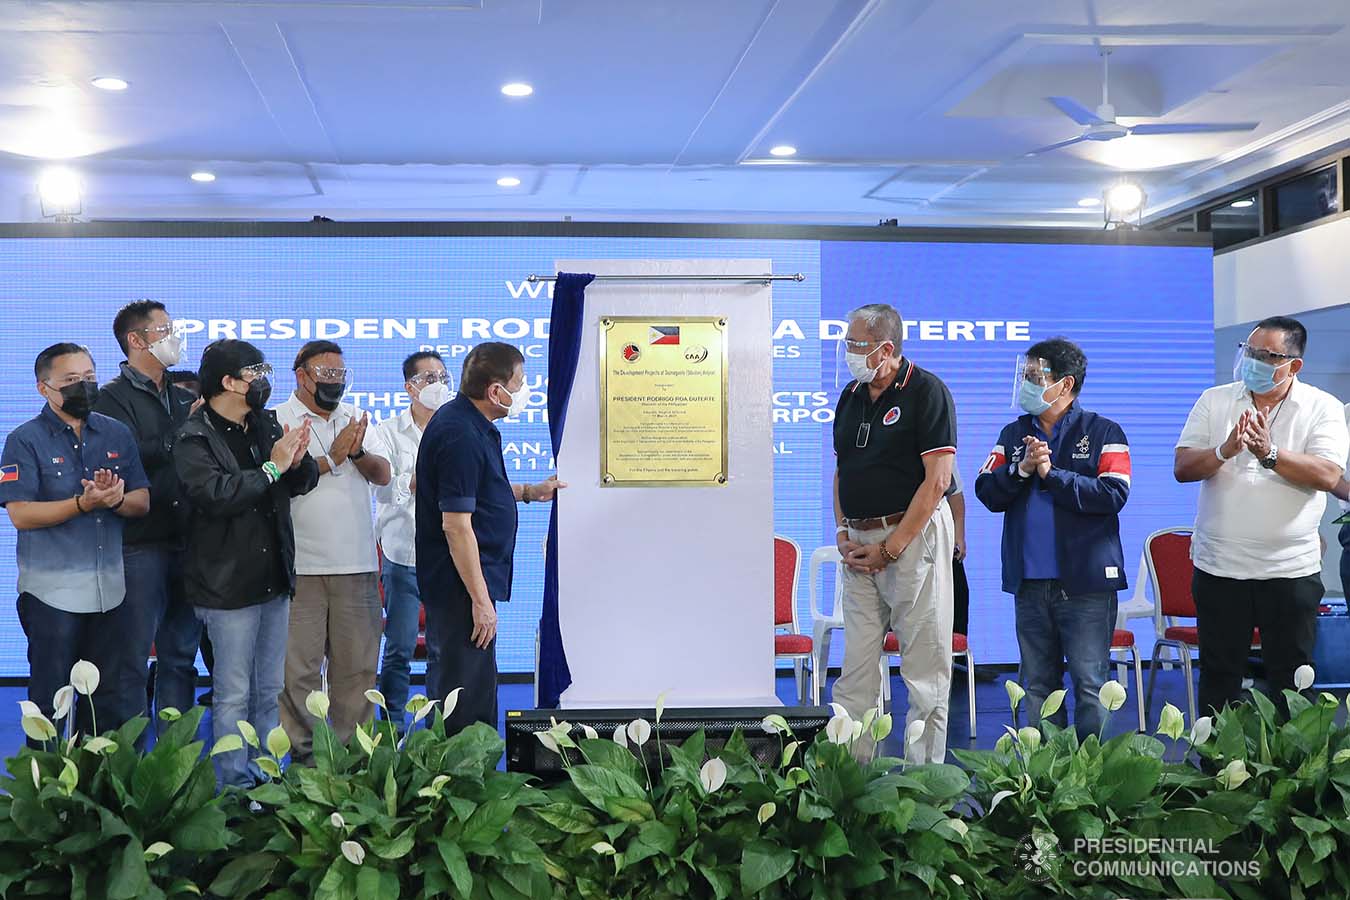 President Rodrigo Roa Duterte leads the unveiling of the marker of the development projects at Dumaguete (Sibulan) Airport in Sibulan, Negros Oriental on March 11, 2021. The President was assisted by Senator Christopher Lawrence “Bong” Go, Transportation Secretary Arthur Tugade, Presidential Assistant for the Visayas Secretary Michael Lloyd Dino, and Civil Aviation Authority of the Philippines Director General Jim Sydiongco. Also present are Presidential Communications and Operations Office Secretary Martin Andanar, Presidential Spokesperson Herminio "Harry" Roque Jr., Chief Presidential Legal Counsel Salvador "Sal" Panelo, Labor and Employment Secretary Silvestre Bello III, and Negros Oriental Governor Roel Degamo. VALERIE ESCALERA/ PRESIDENTIAL PHOTO